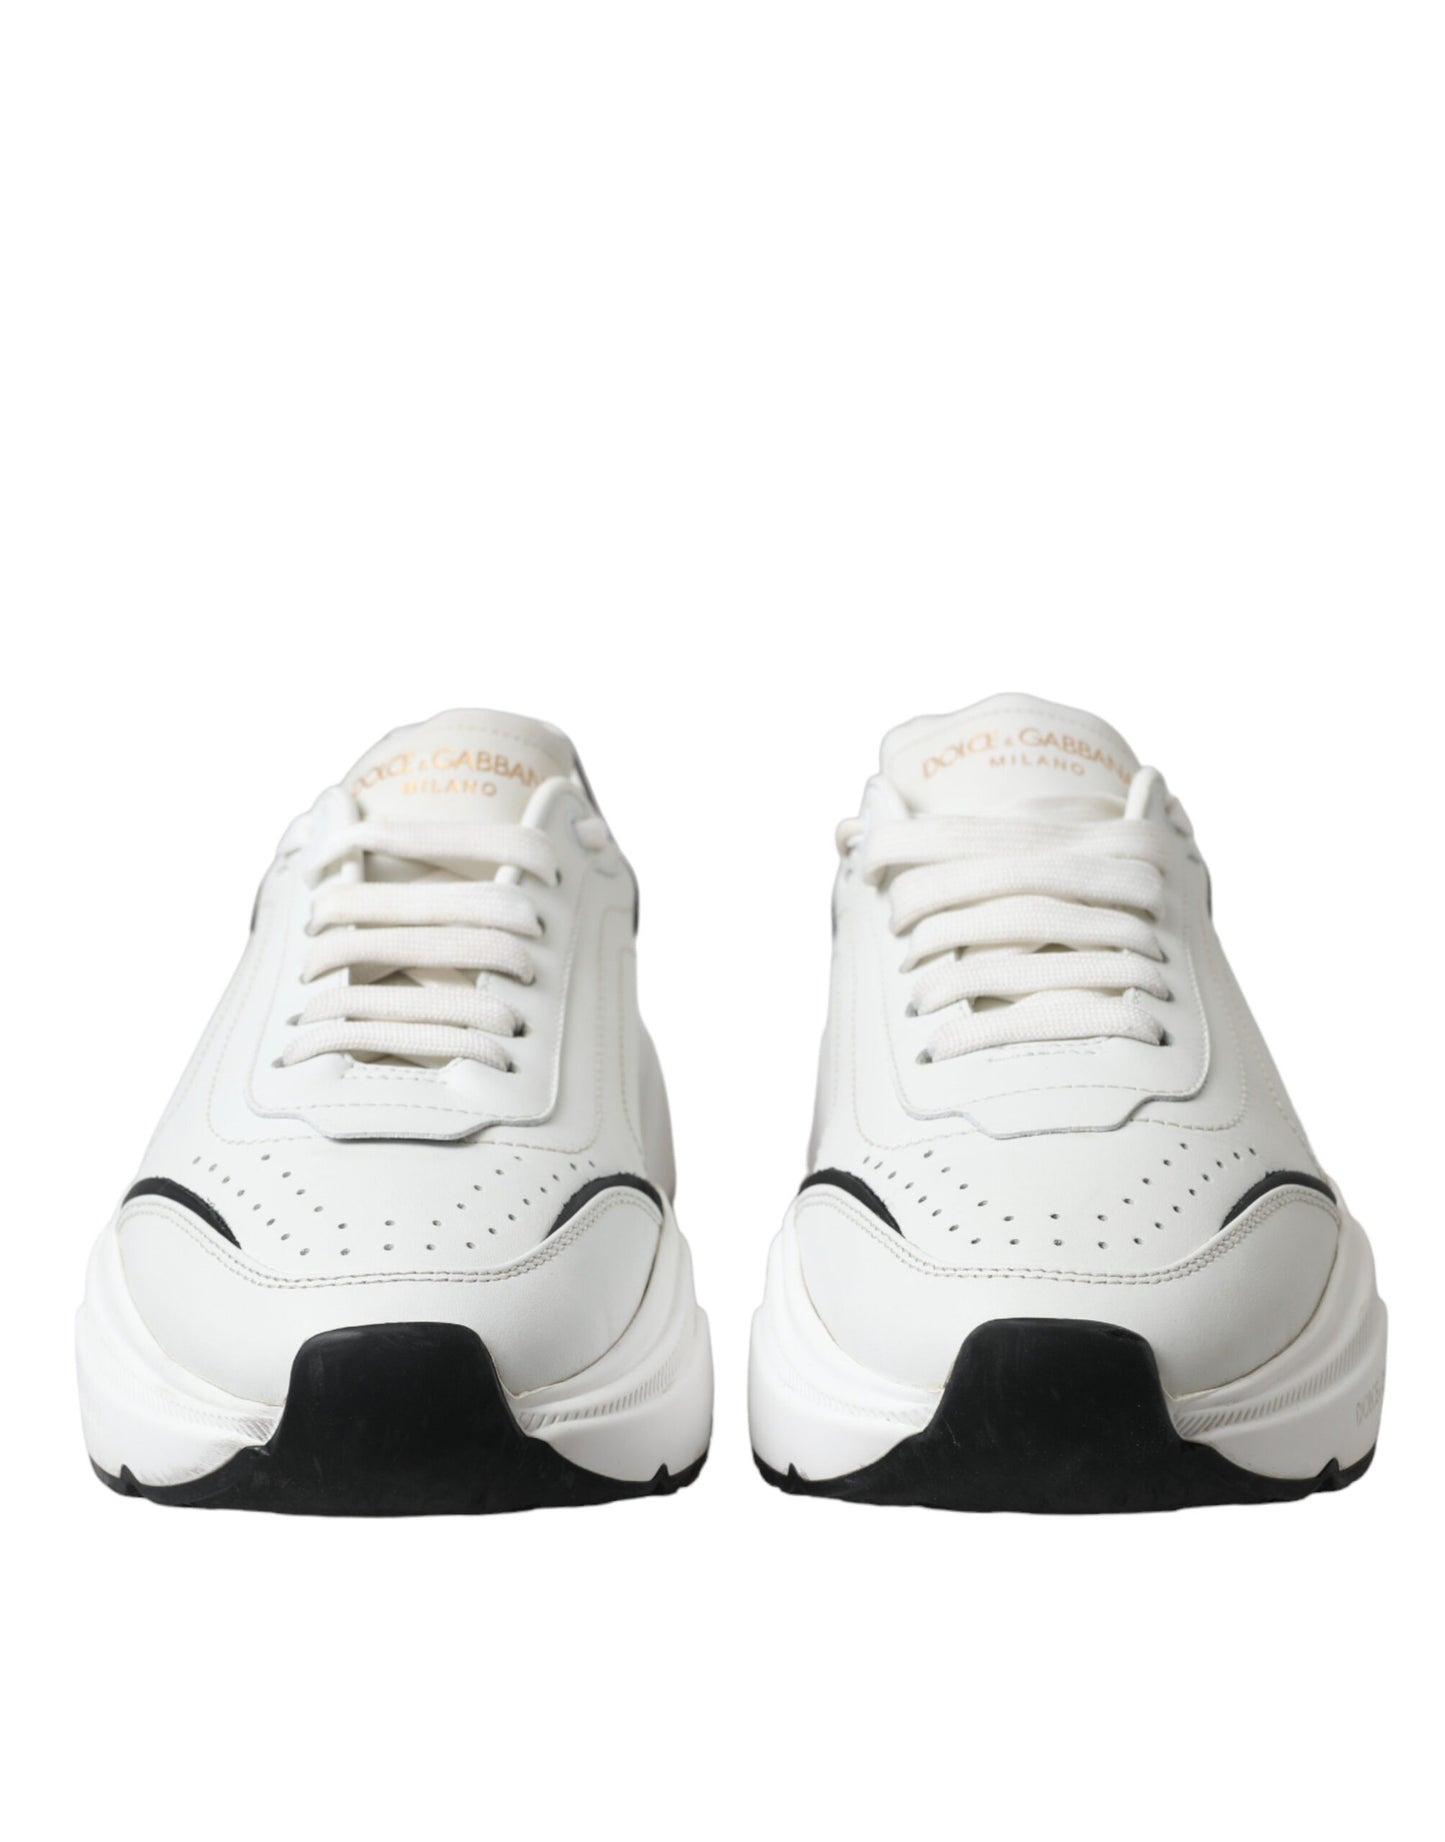 Dolce & Gabbana Chic Almond-Toe Daymaster Sneakers